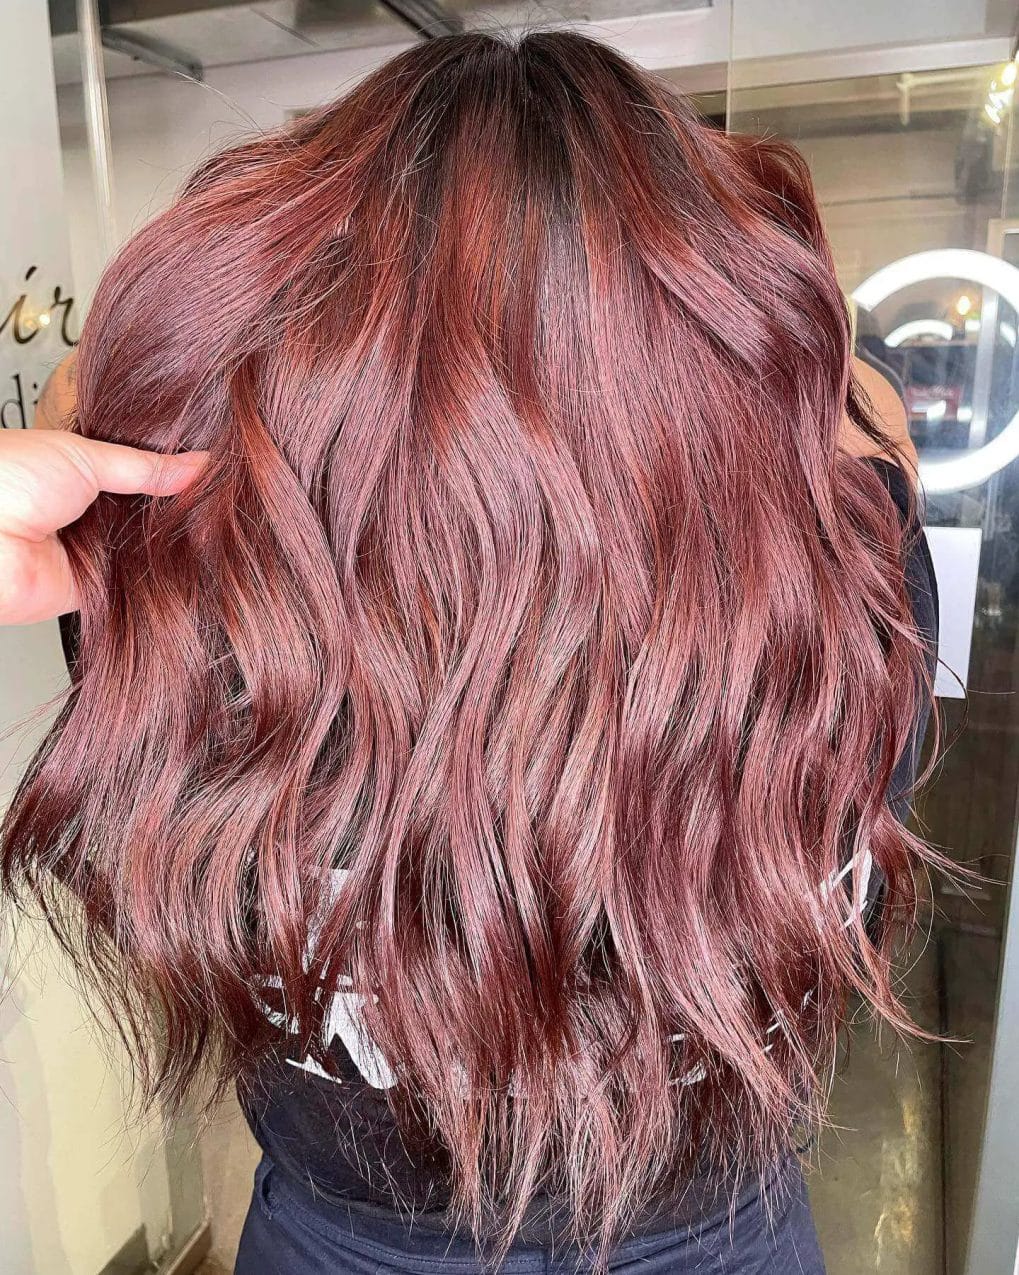 Dynamic red balayage on mid-length brunette, tousled layers.